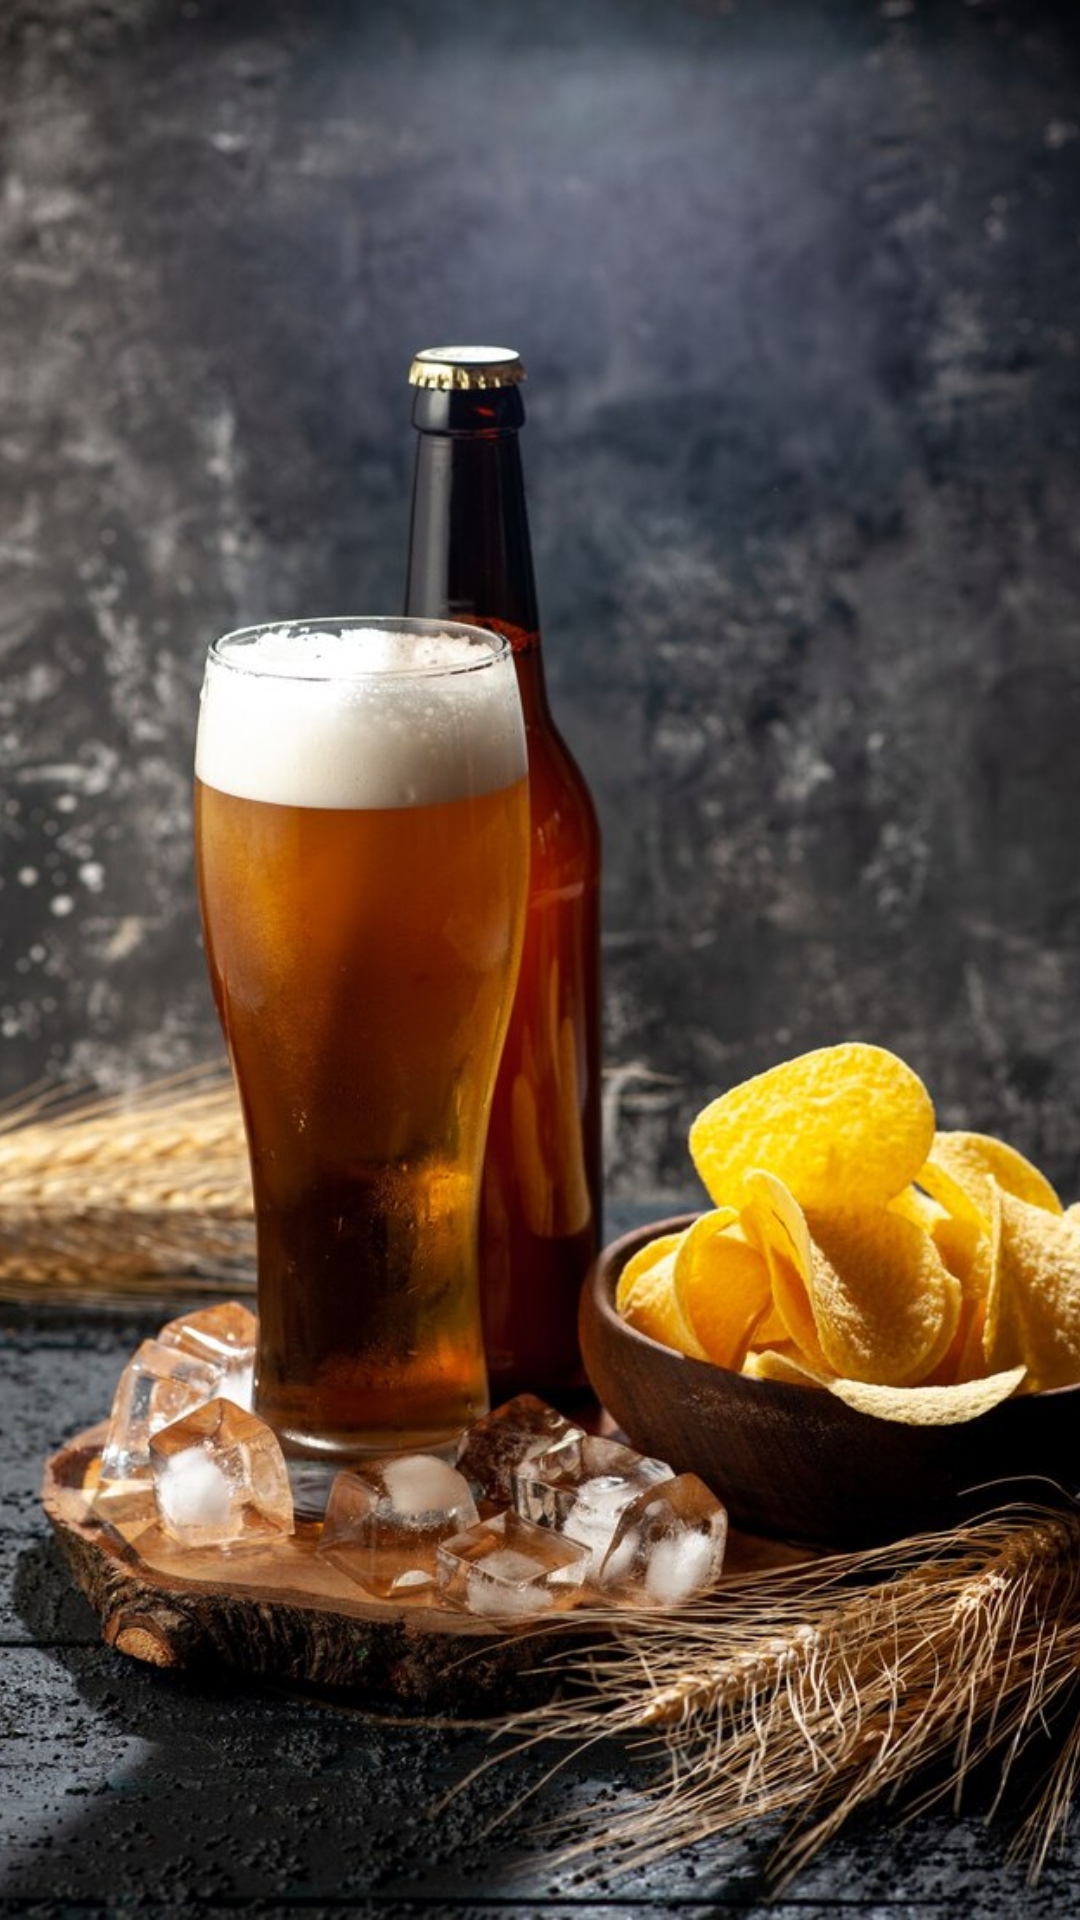 7 most expensive beers in India